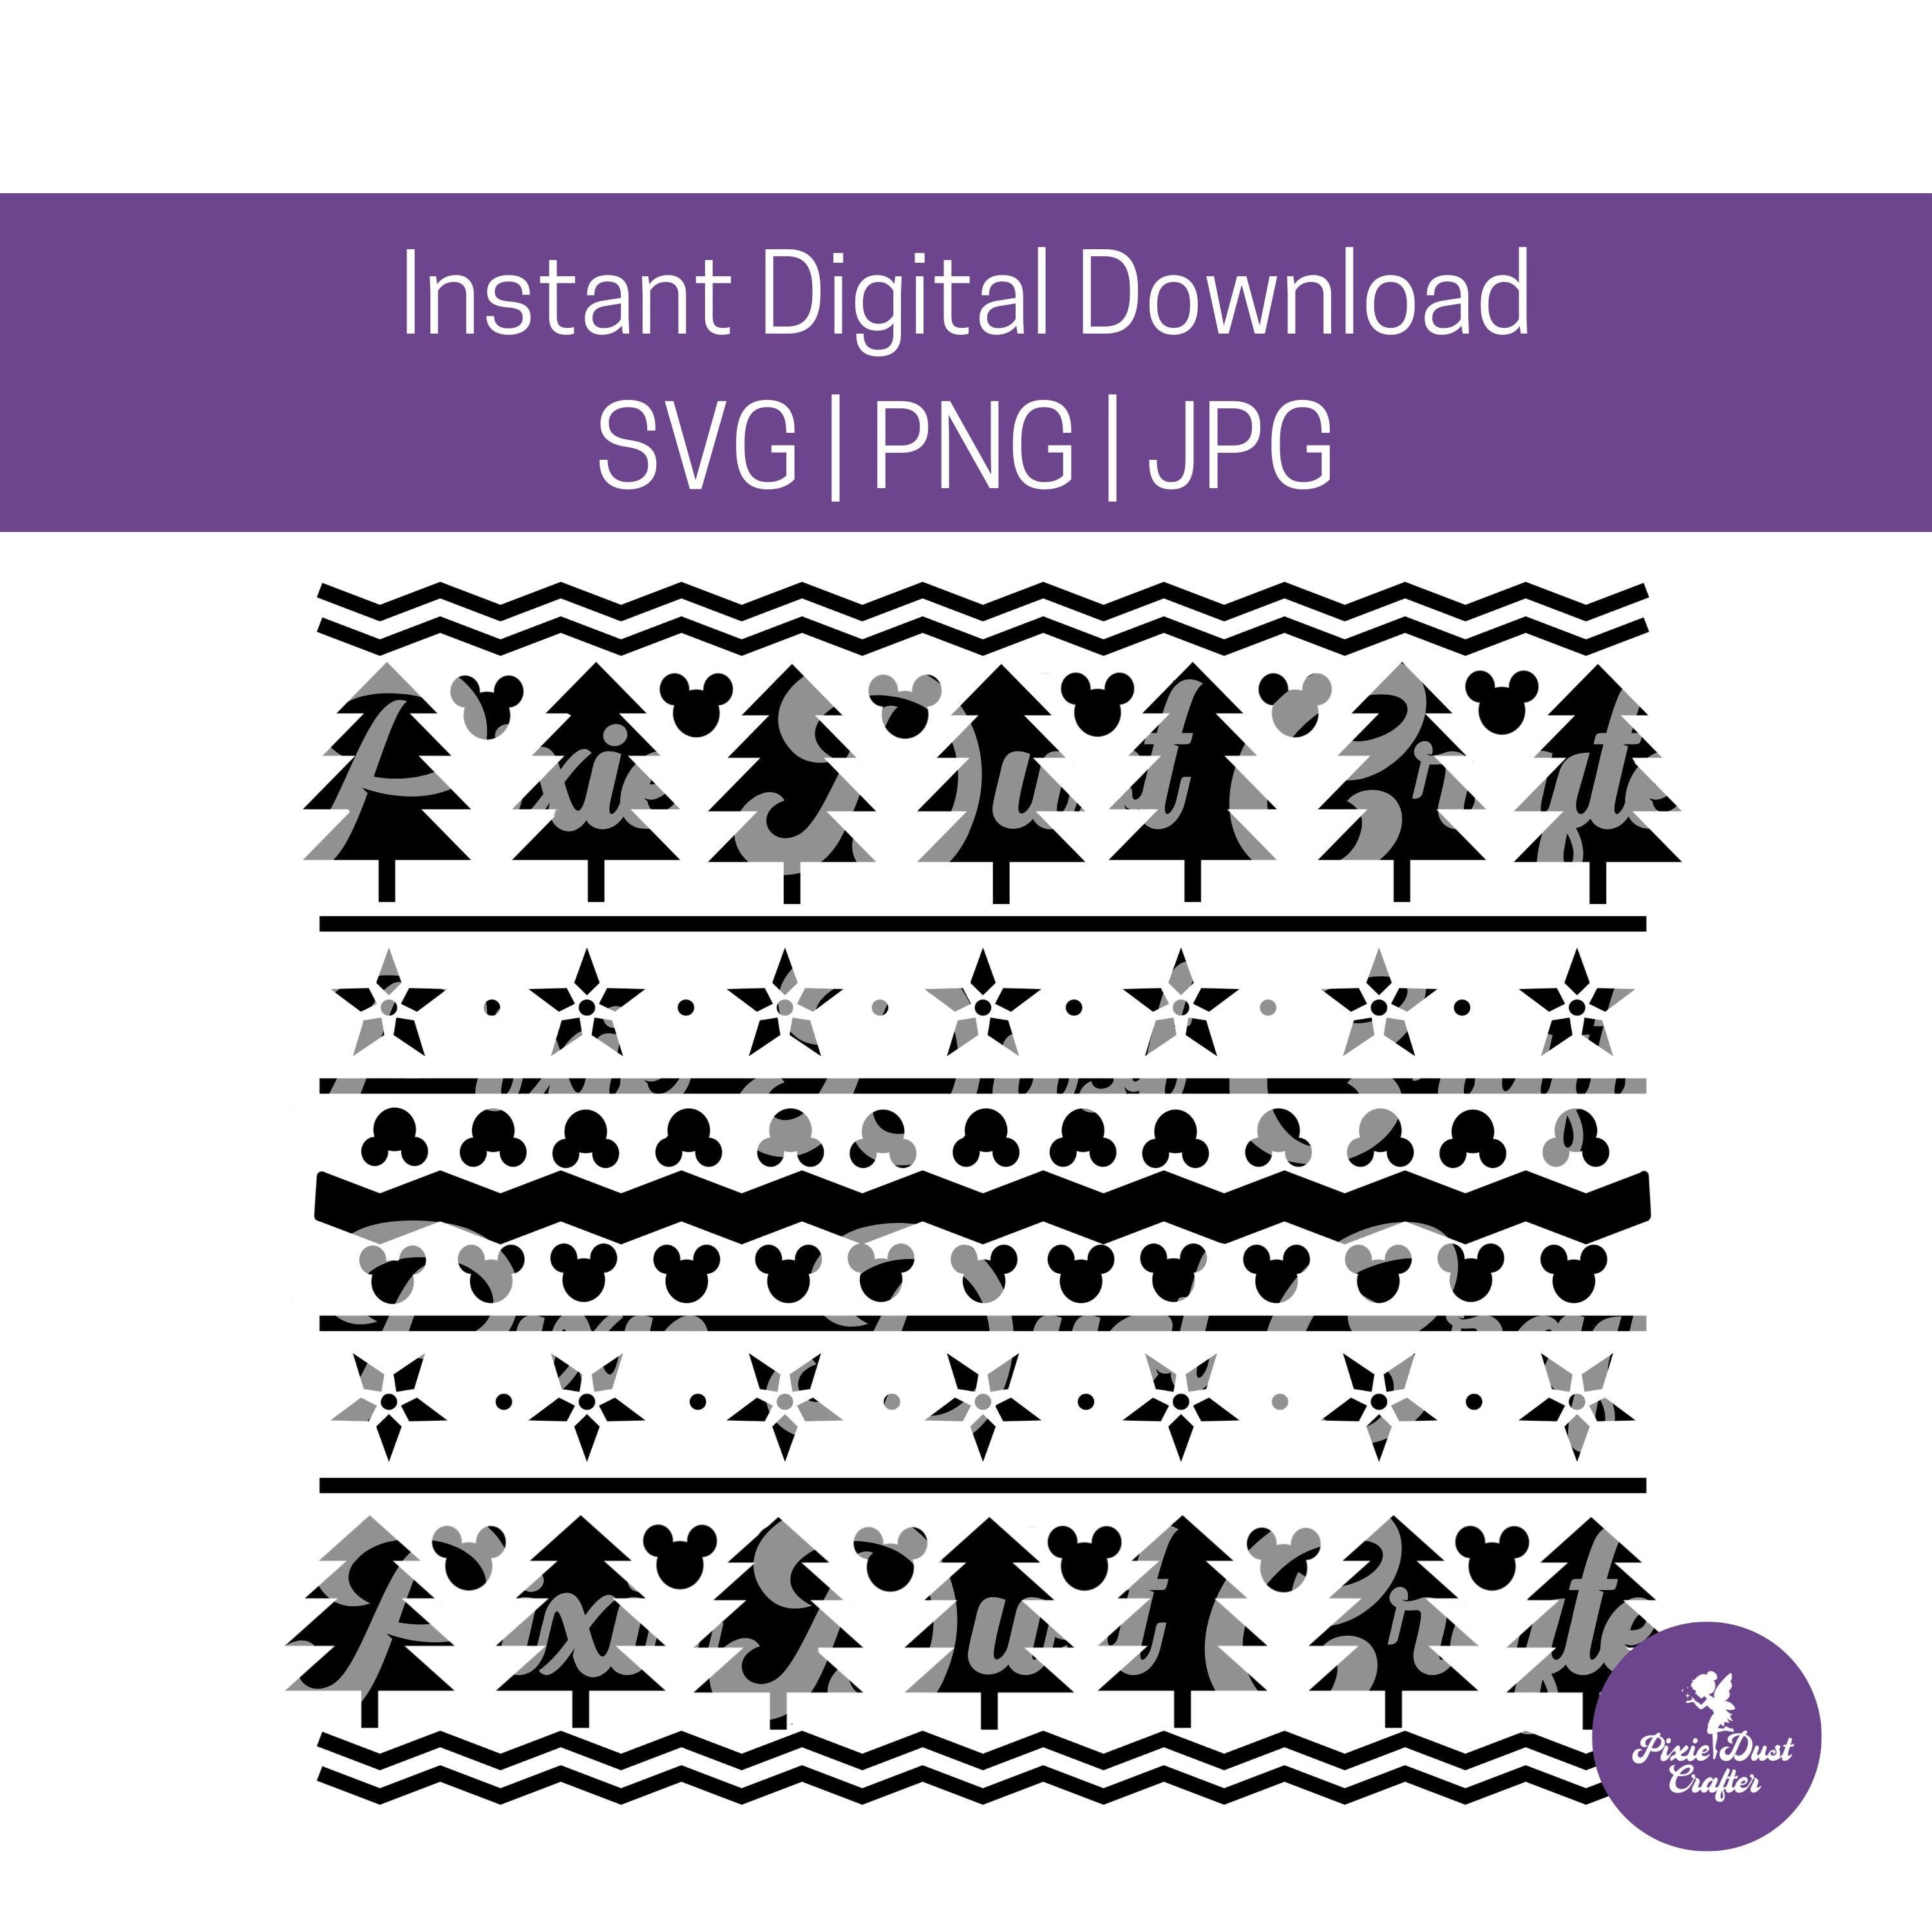 Mouse Christmas Sweater pattern, Ugly Christmas Sweater svg png jpg, Cricut, Silhouette, Sublimation, Waterslide